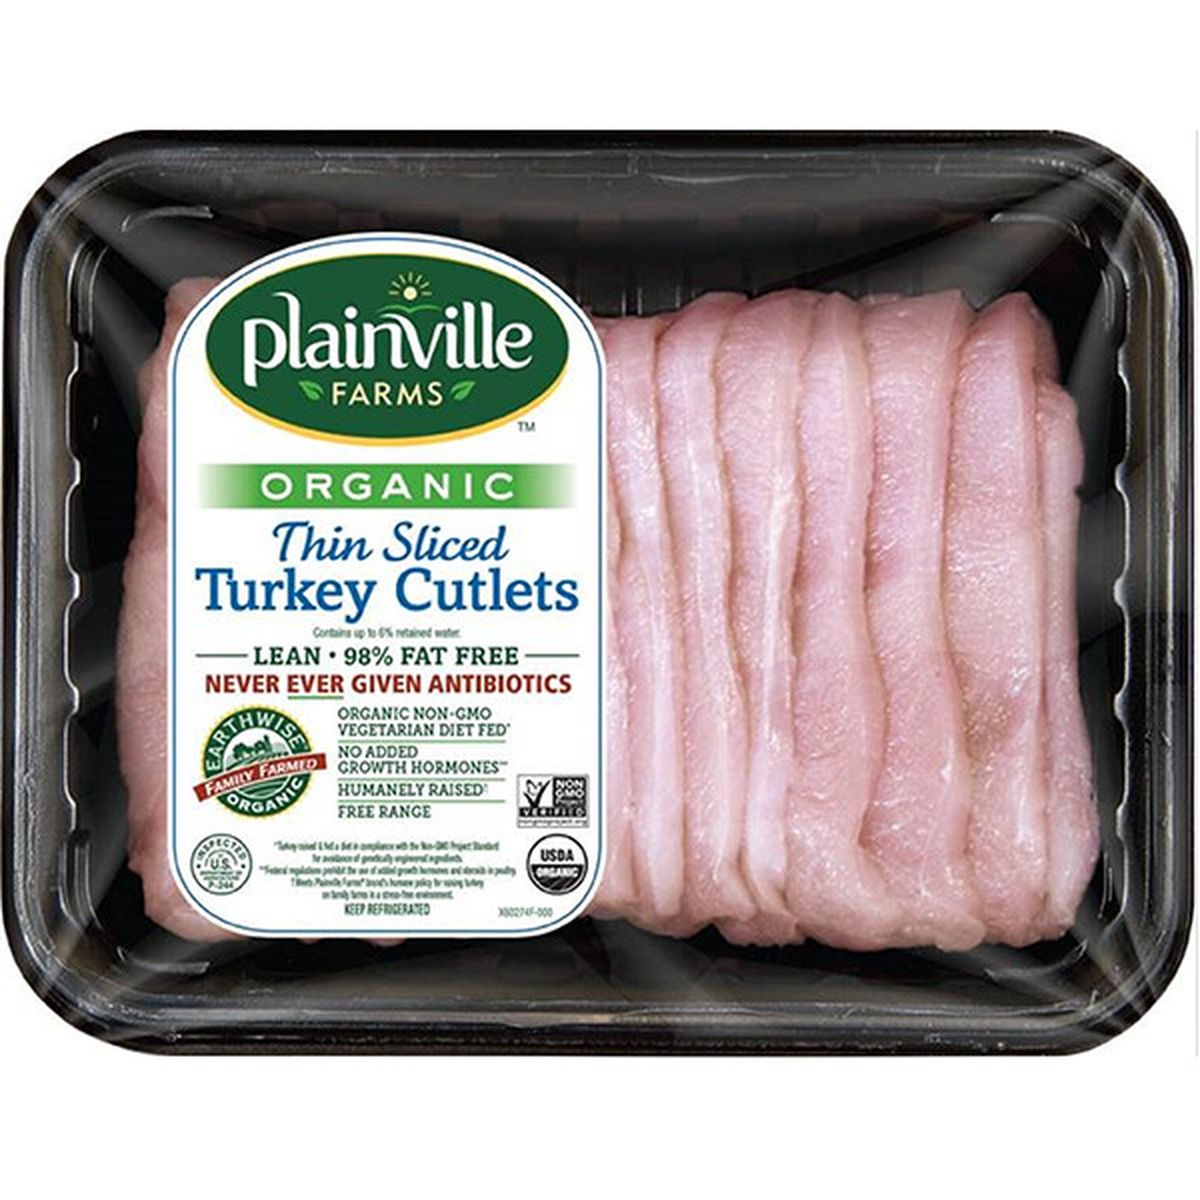 Calories in Plainville Farms Organic Thin Sliced Turkey Cutlets